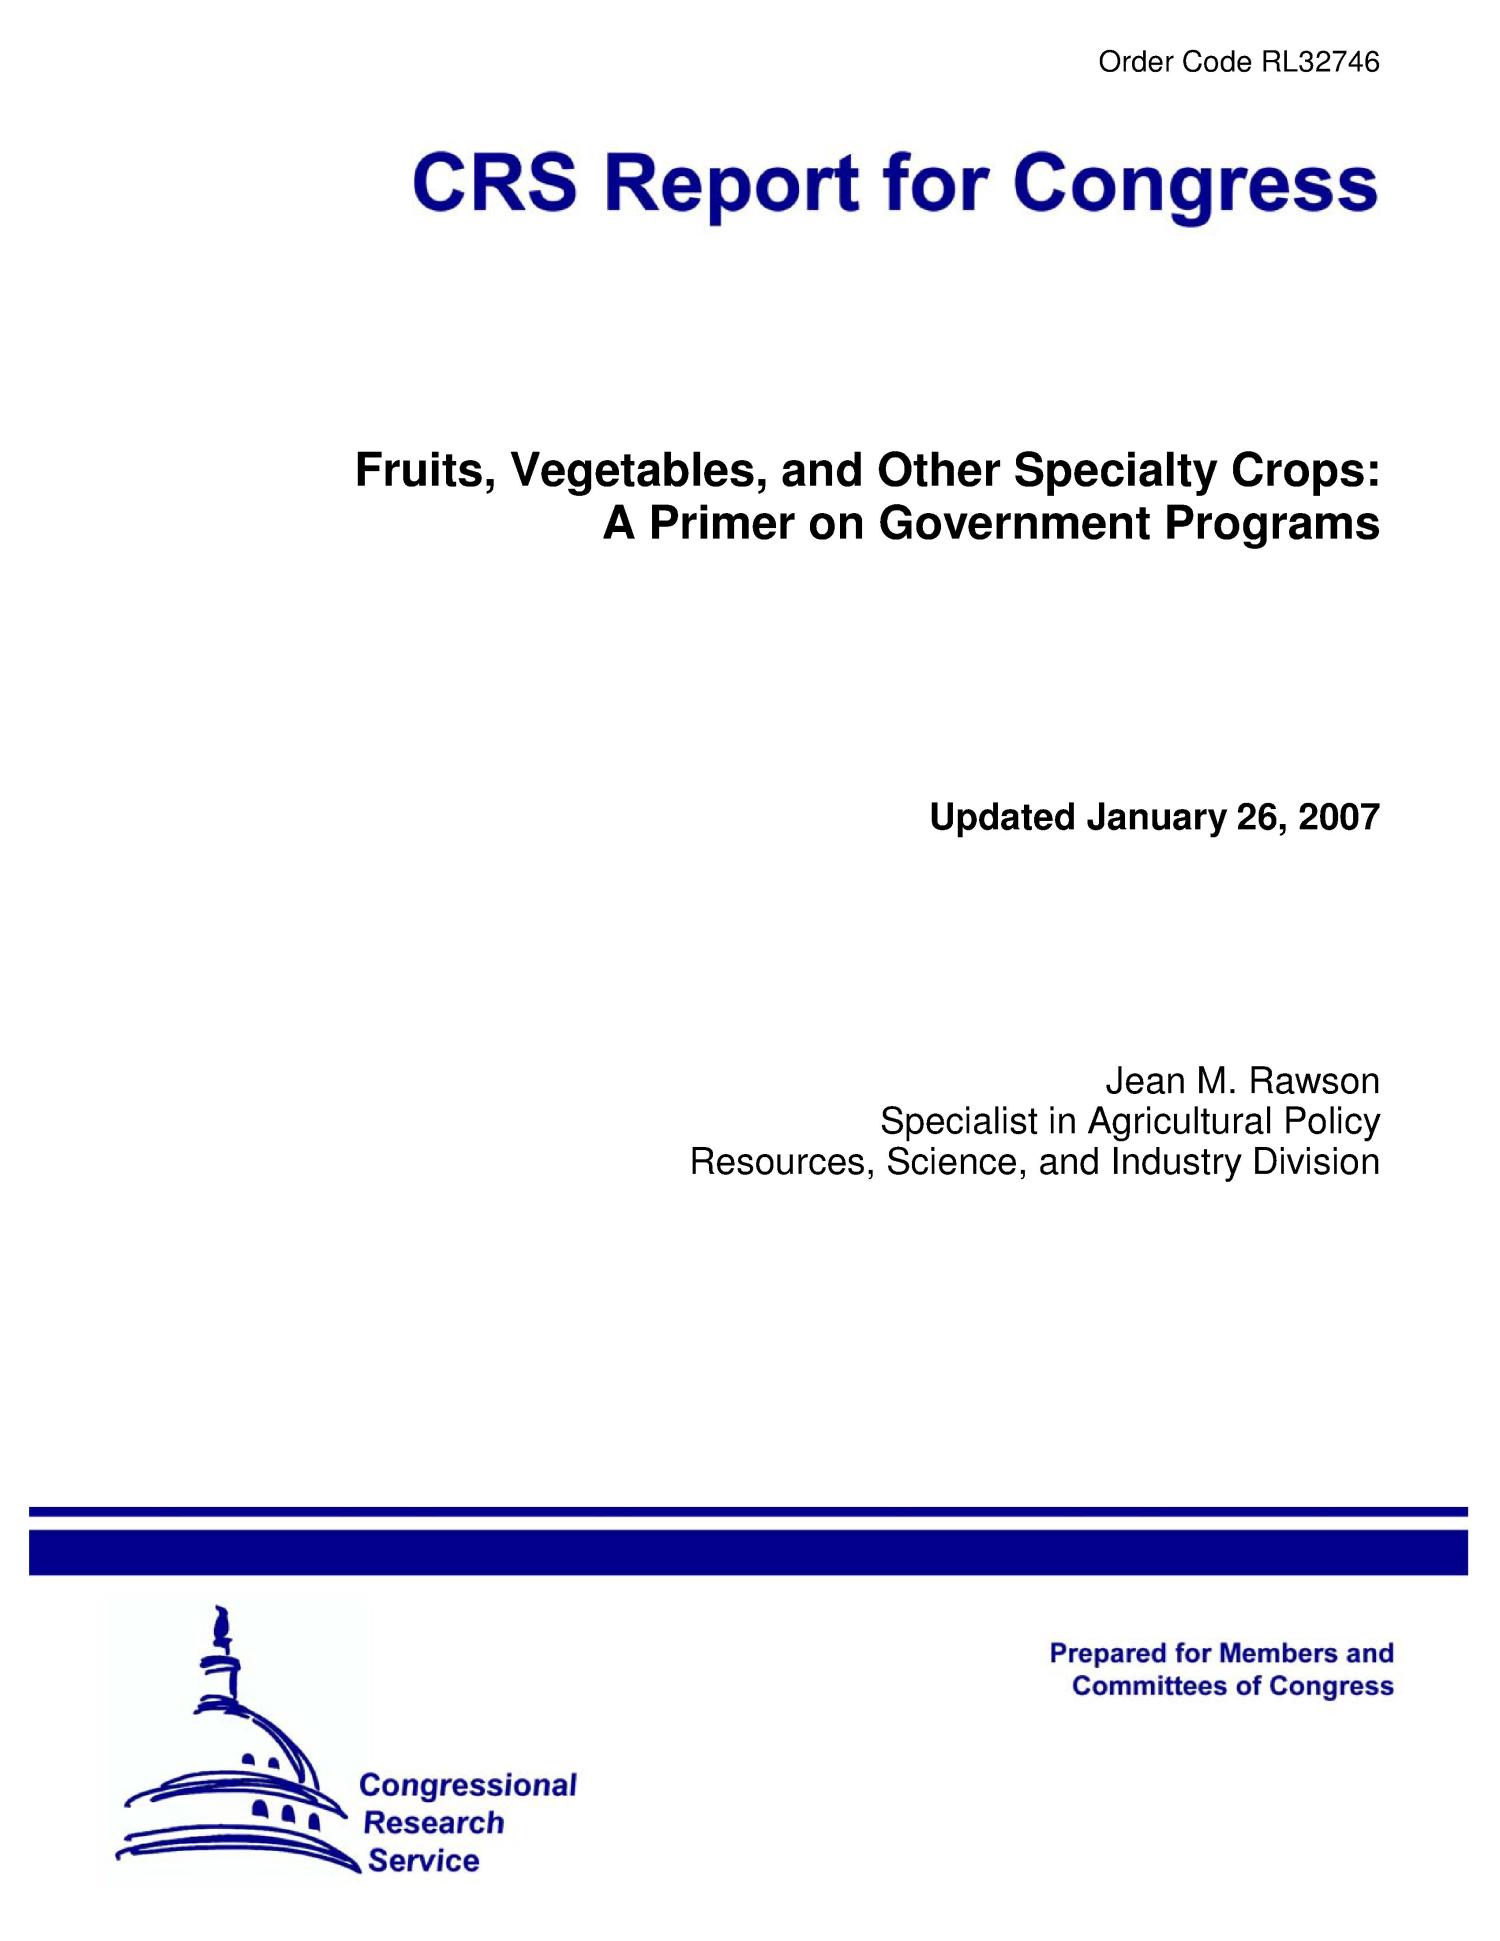 Fruits, Vegetables, and Other Specialty Crops: A Primer on Government Programs
                                                
                                                    [Sequence #]: 1 of 25
                                                